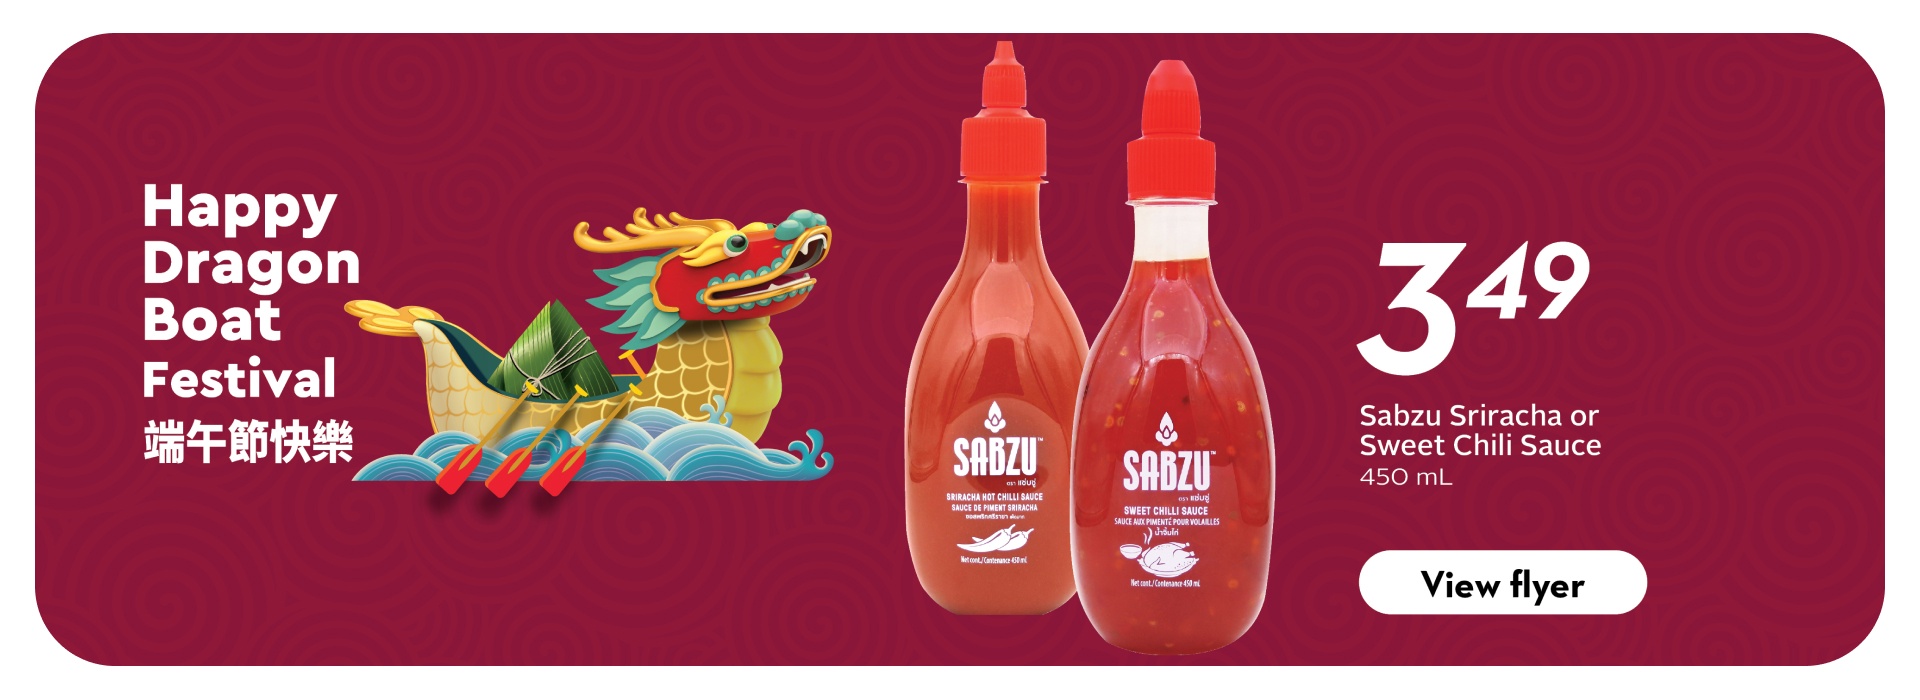 The following image contains the text, "Â Happy Dragon Boat Festival, buy sabzu sriracha or sweet chilli sauce 450 ml, along with the 'view flyer' button.